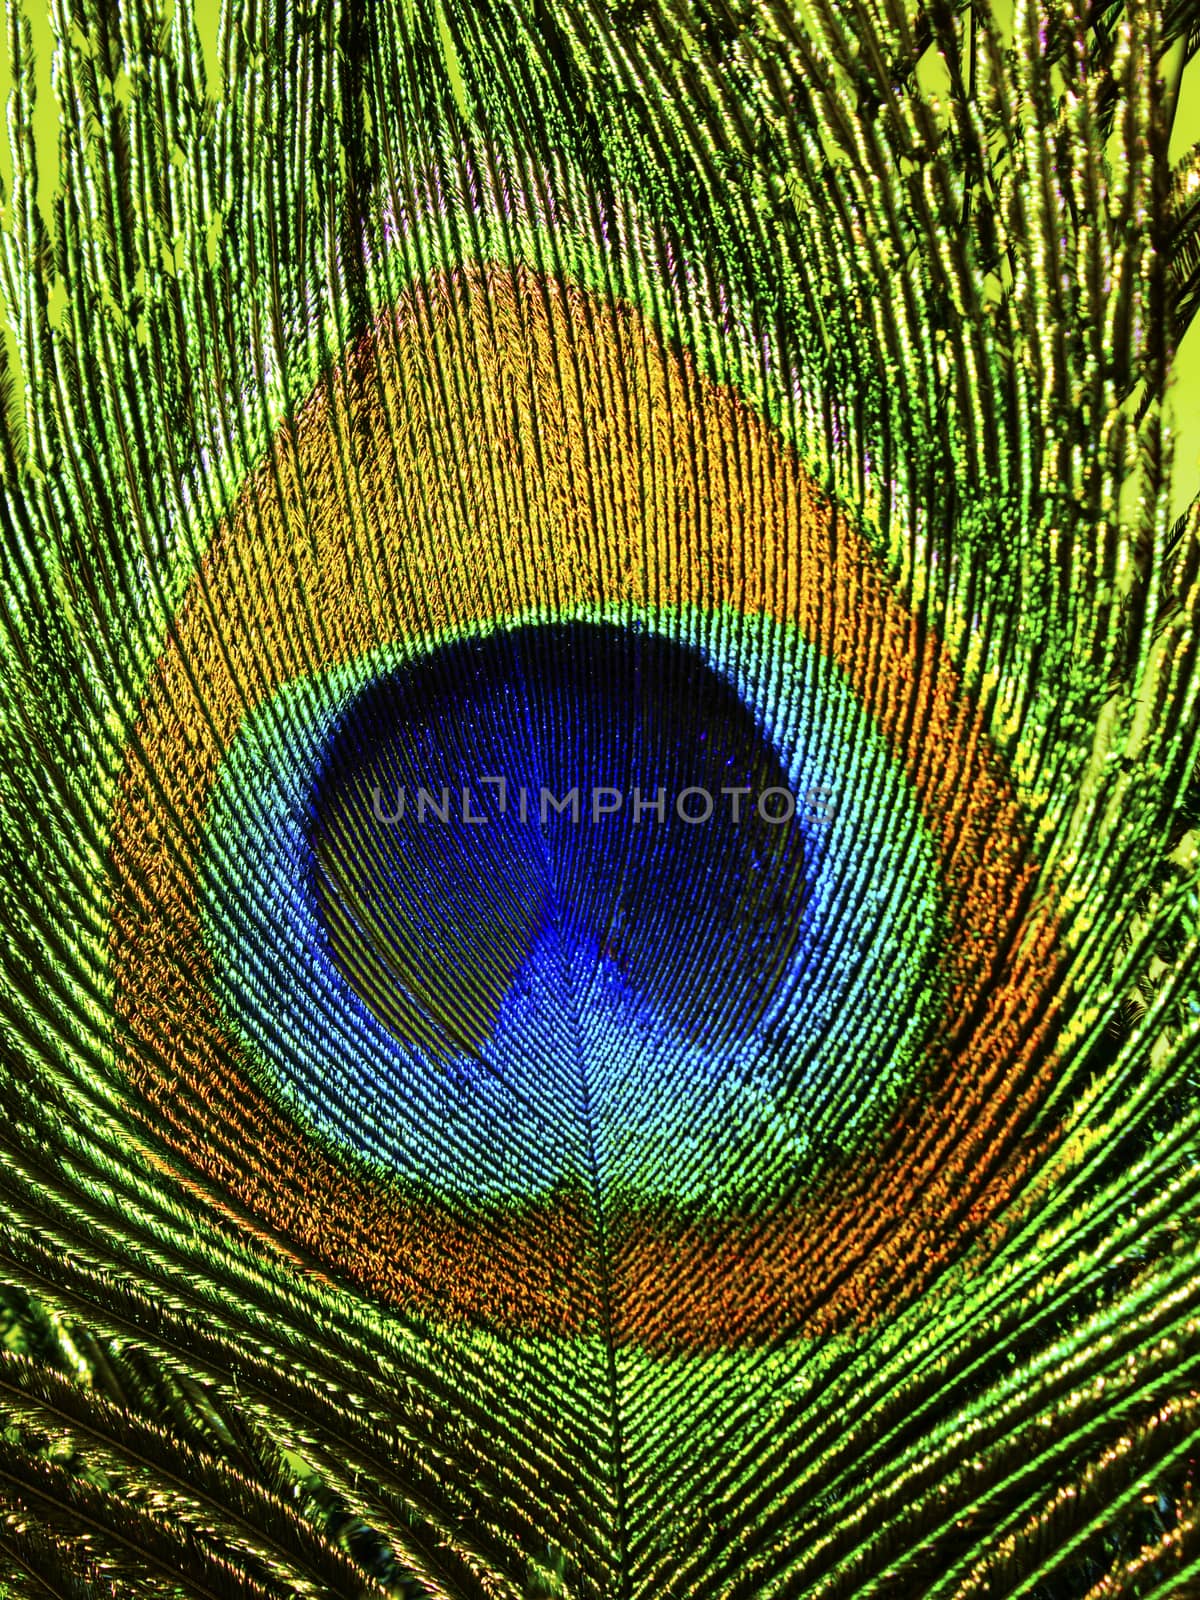 Peacock feather eye in closeup by CharlieFloyd